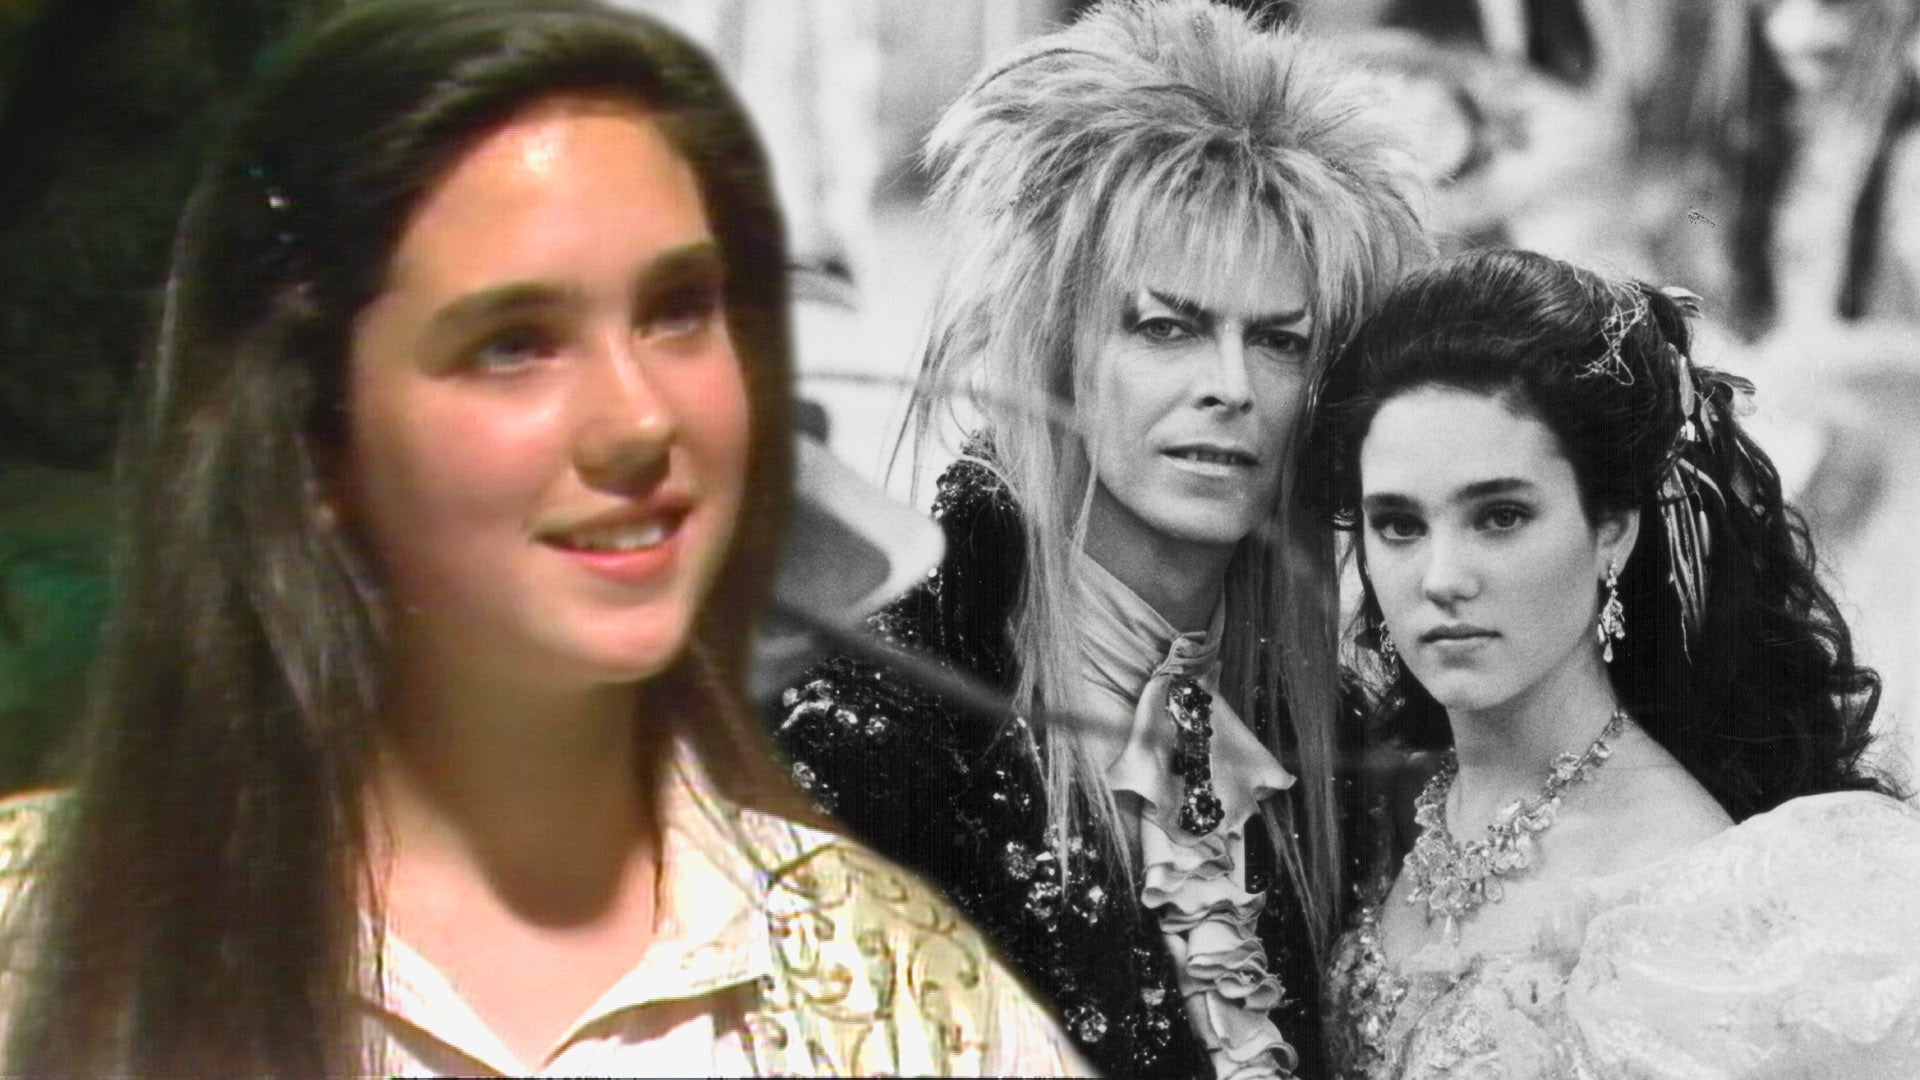 Cognitive Dissonance - David Bowie and Jennifer Connelly - Labyrinth [1986]  